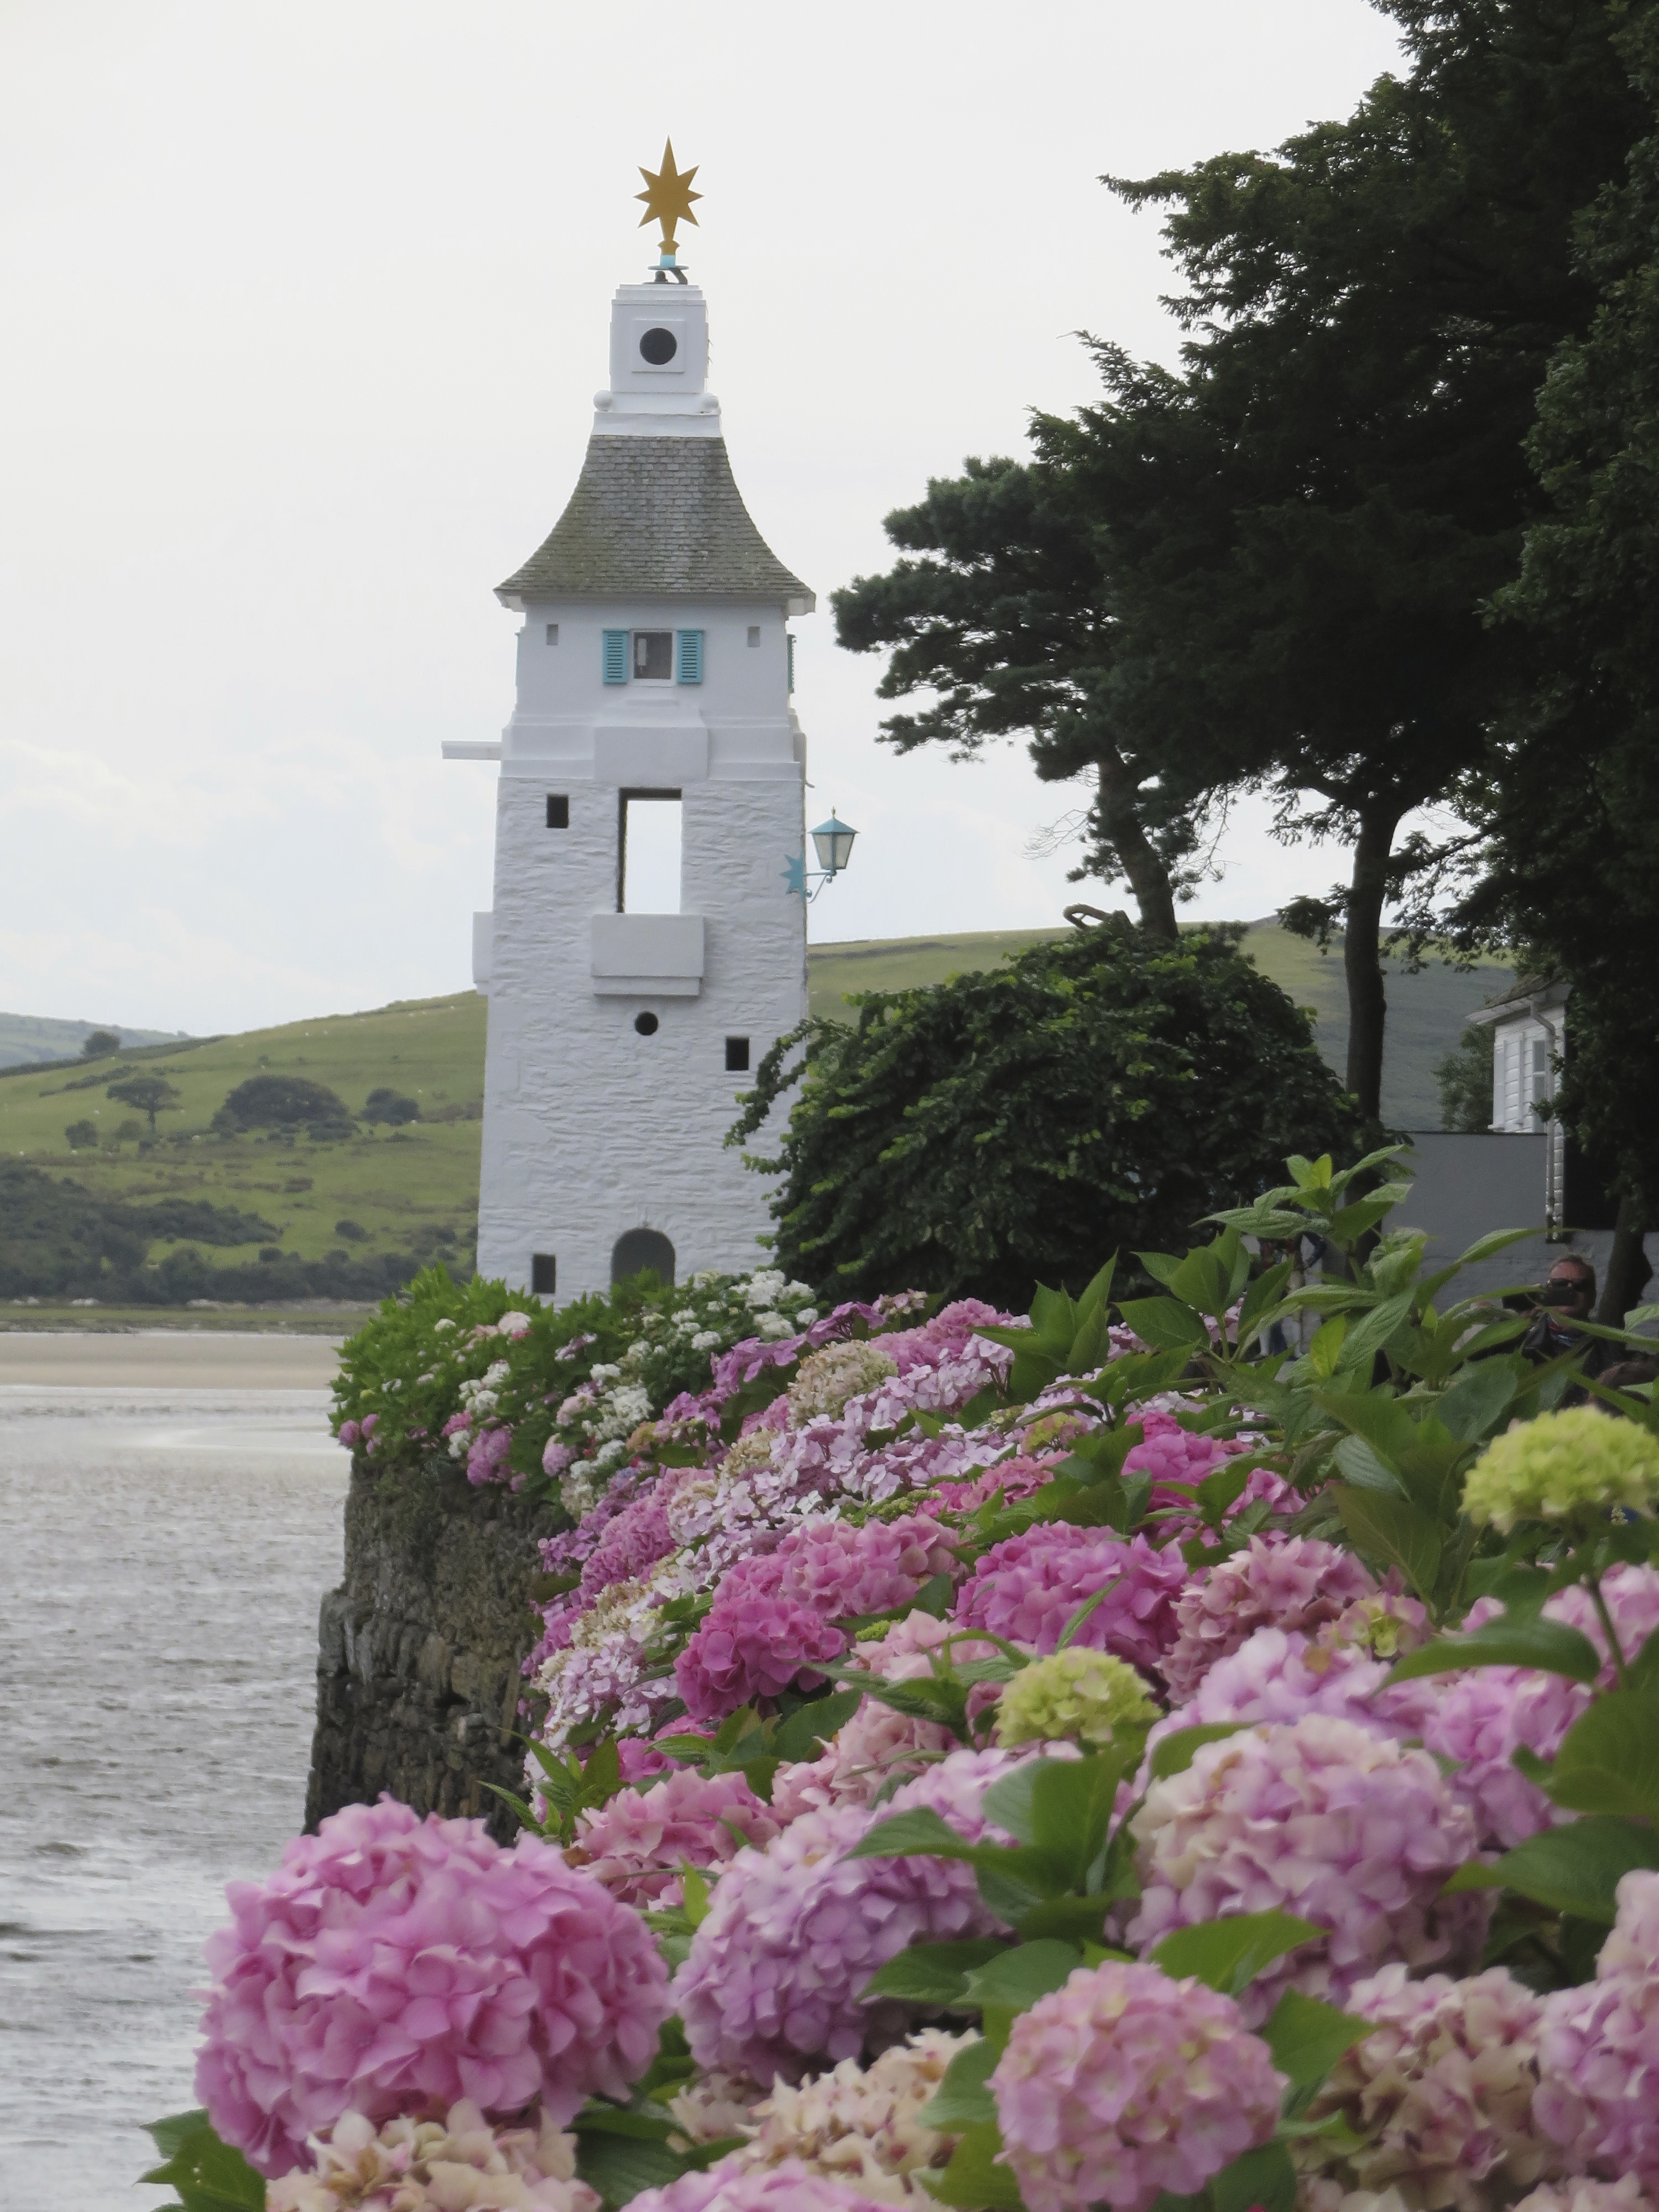 There is no light in the Portmeirion lighthouse